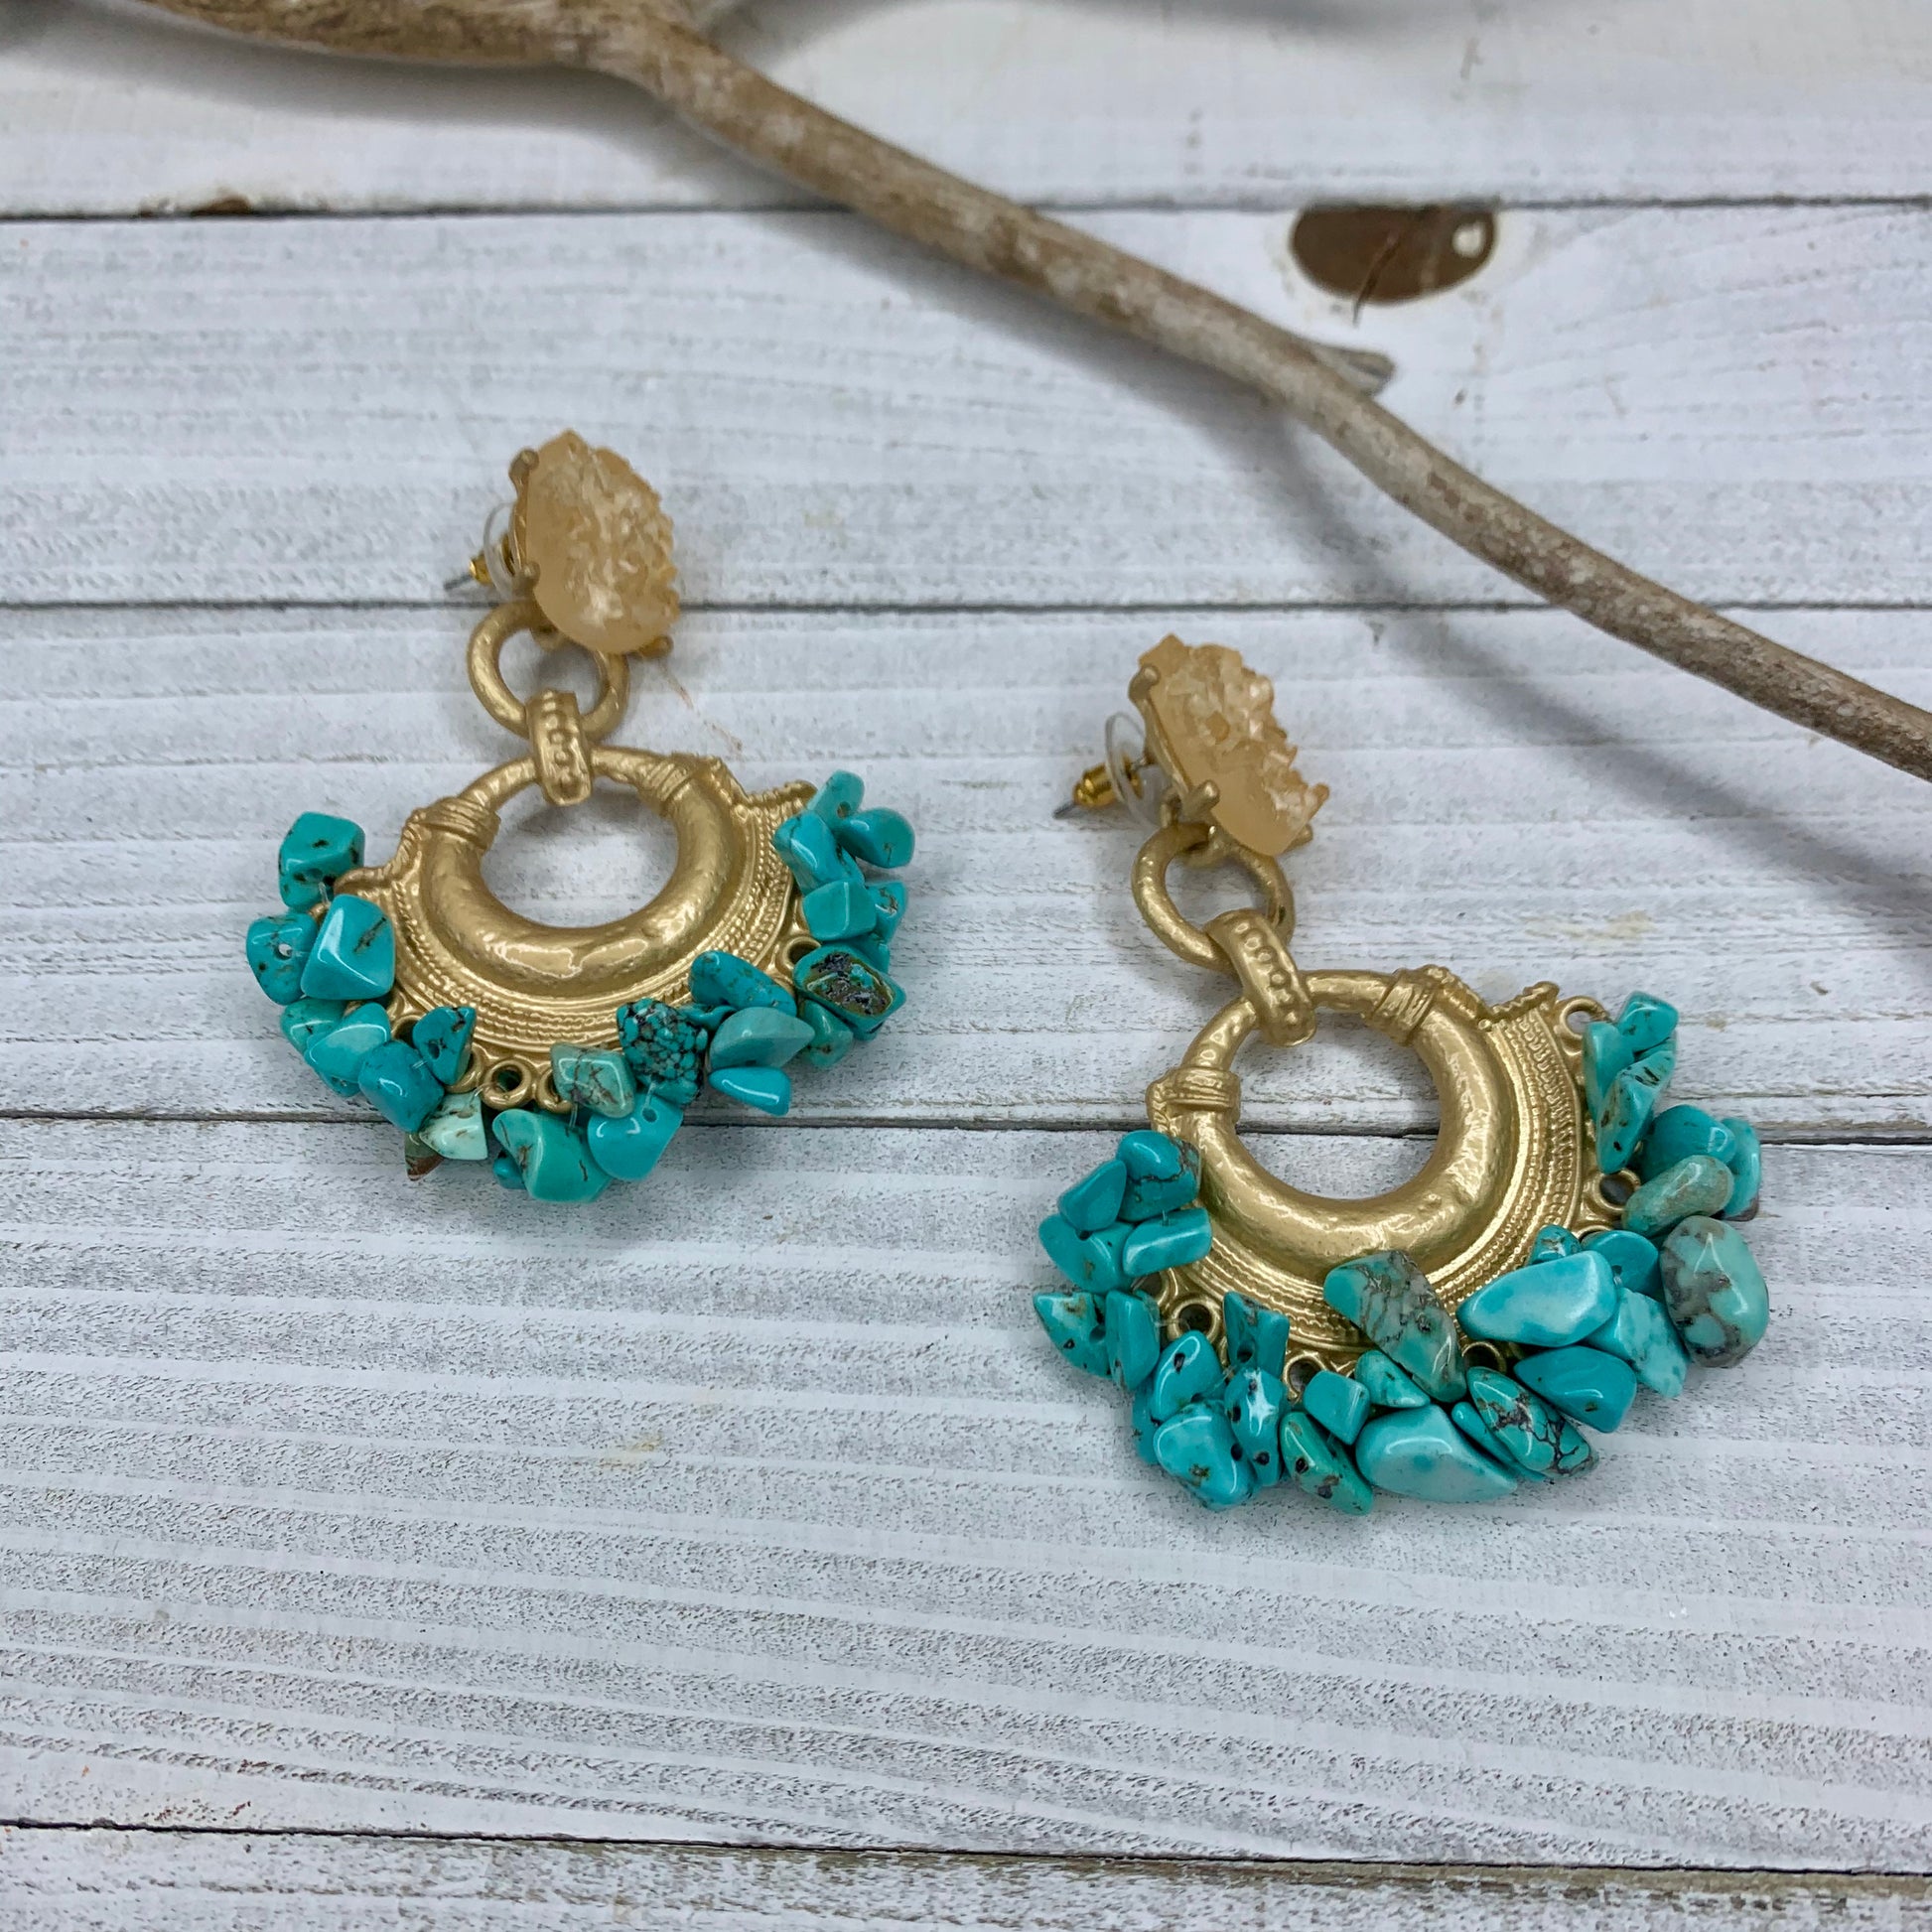 Based Metad Plated Earrings with  Beaded Turquoise Gemstones Chips